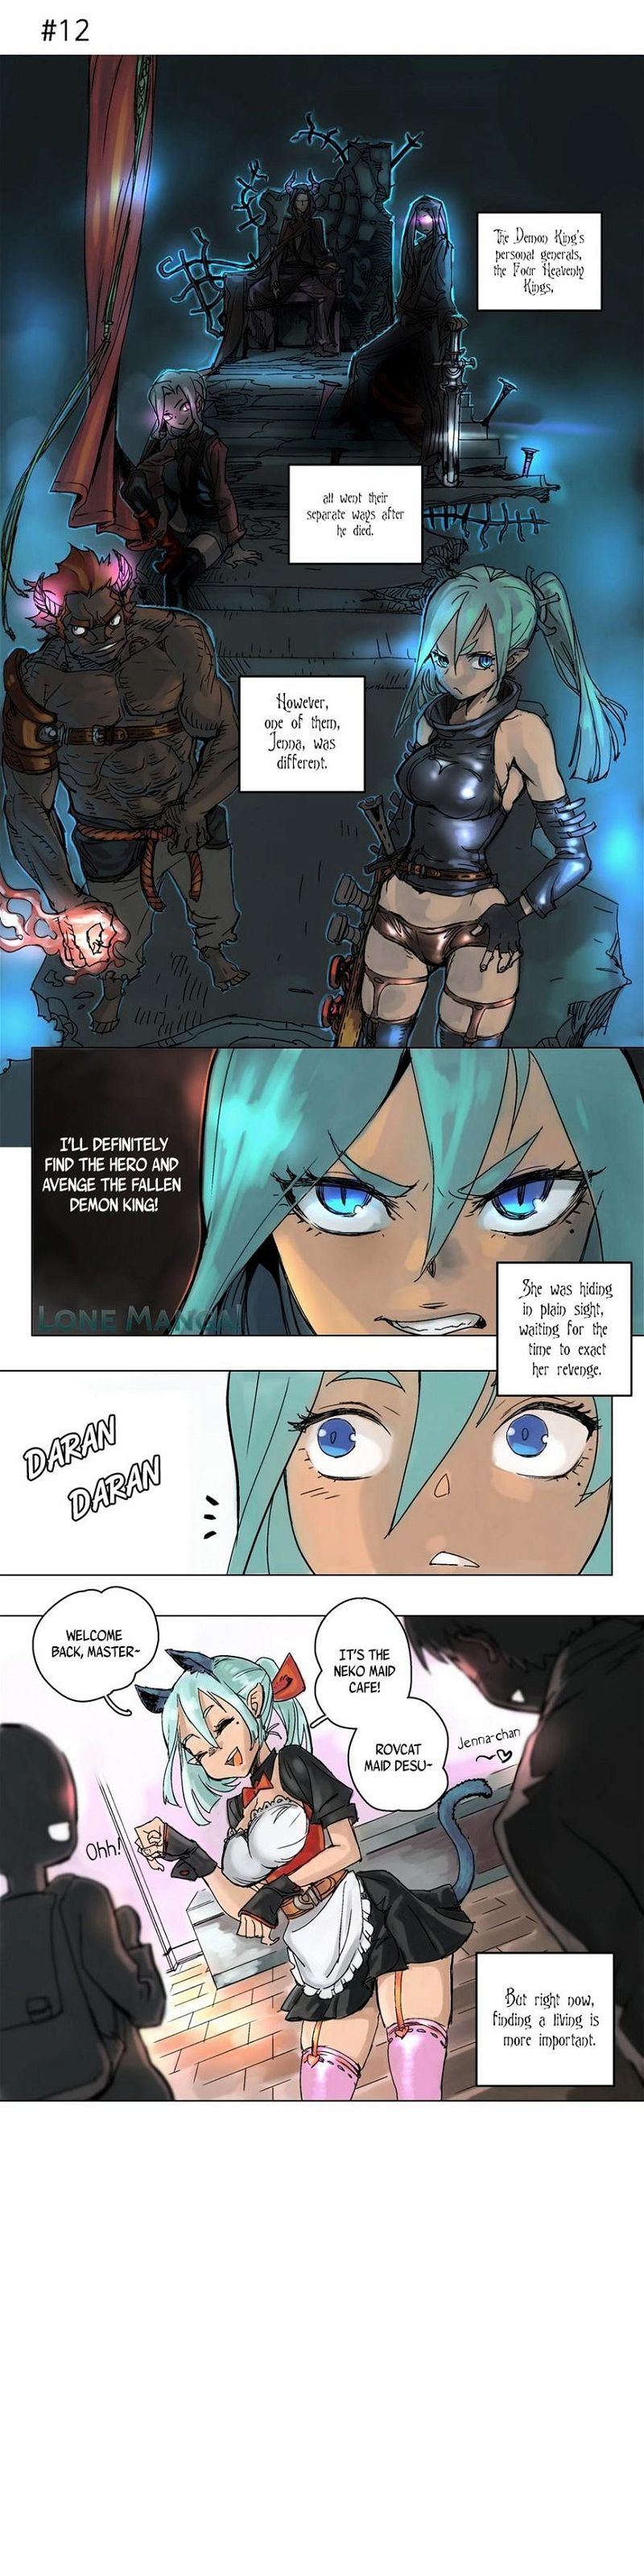 4 Cut Hero Chapter 1 page 7